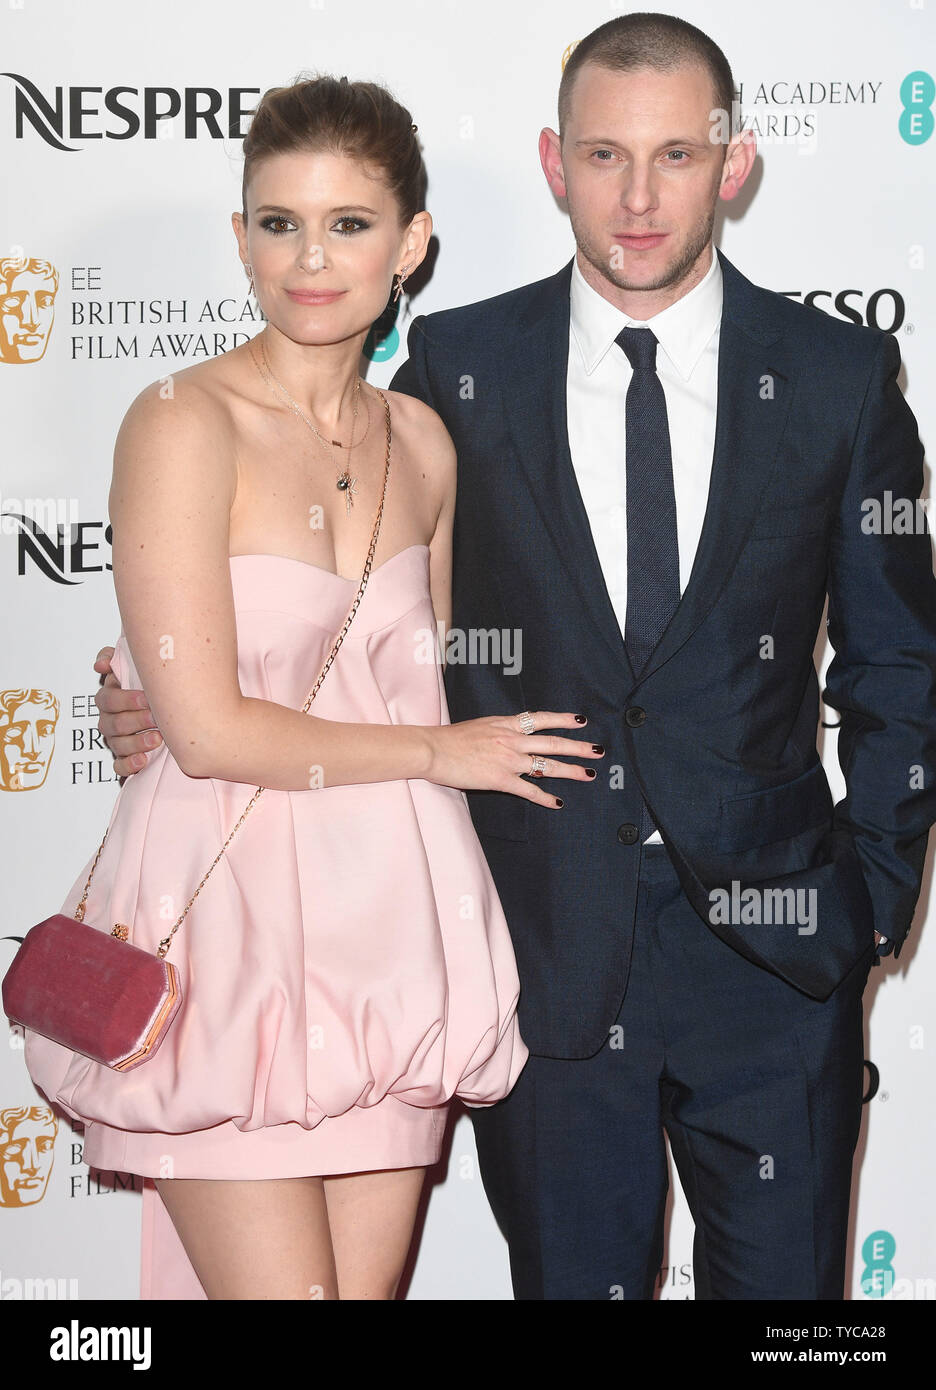 American actress Kate Mara and British actor Jamie Bell attend the British Academy Film Awards Nominees Party at Kensington Palace in London on February 17, 2018. Photo by Rune Hellestad/ UPI Stock Photo